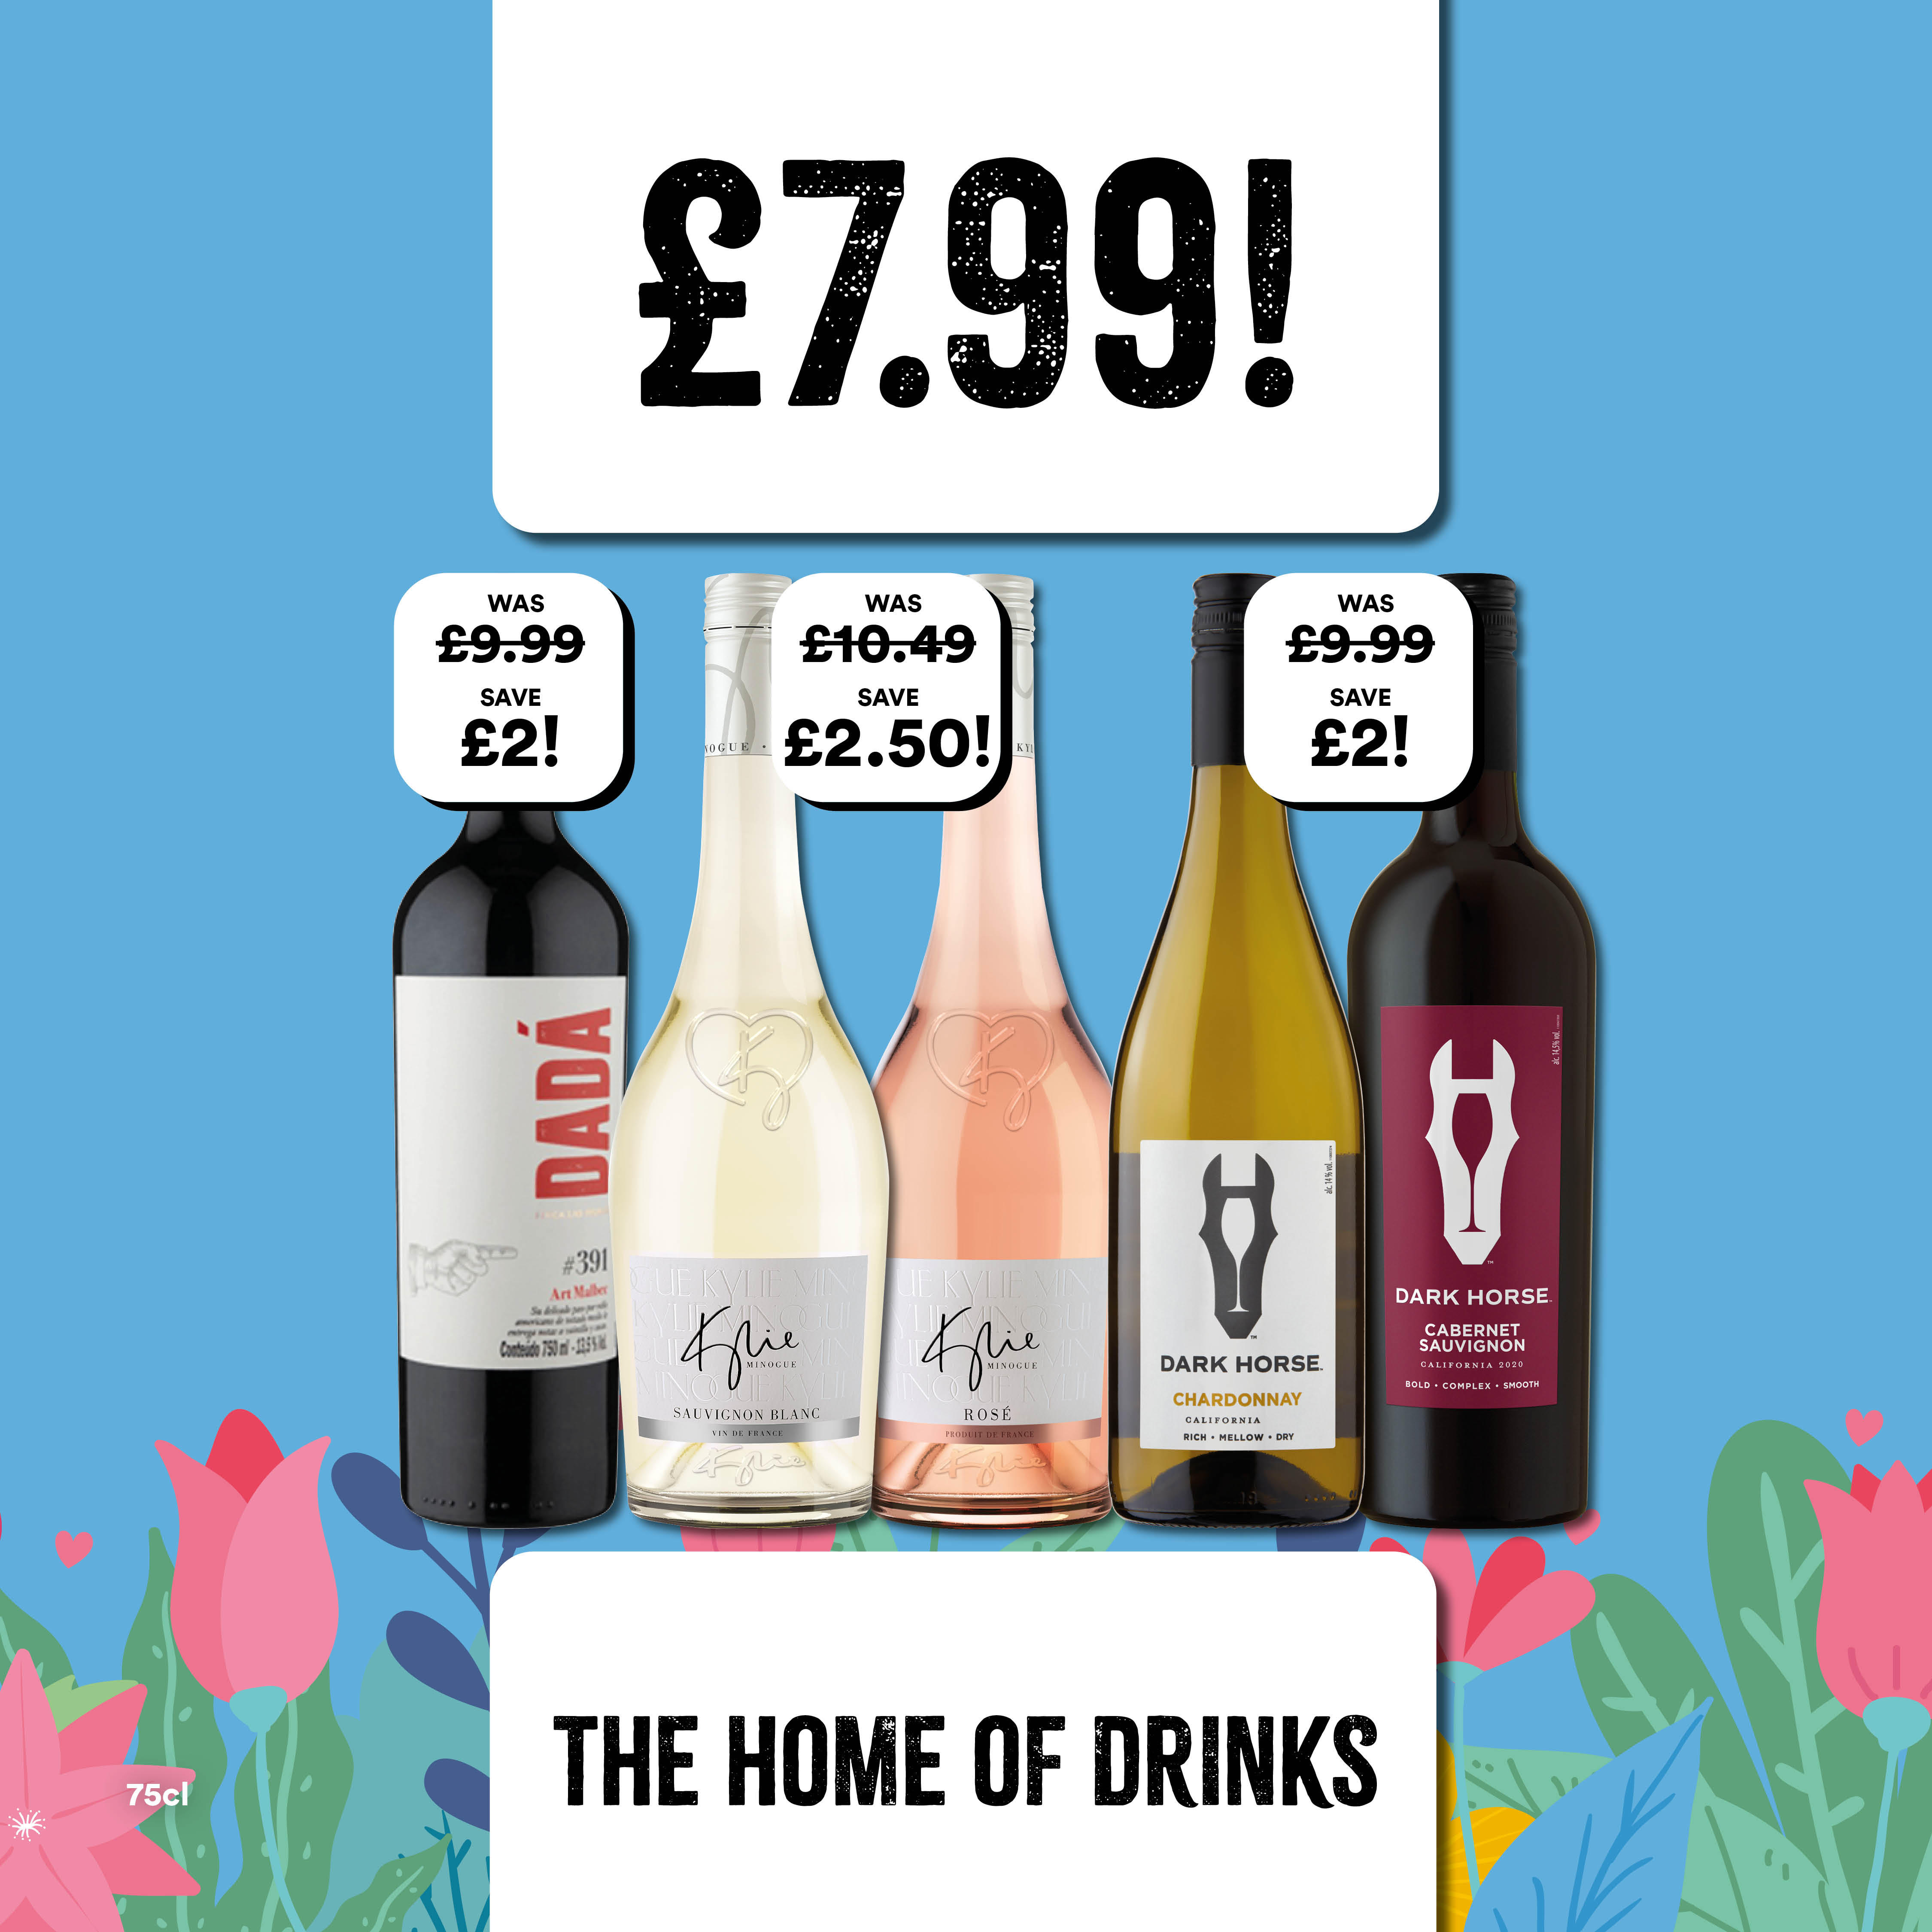 Only £7.99 On selcted wines Bargain Booze Select Convenience Carlisle 01228 590714